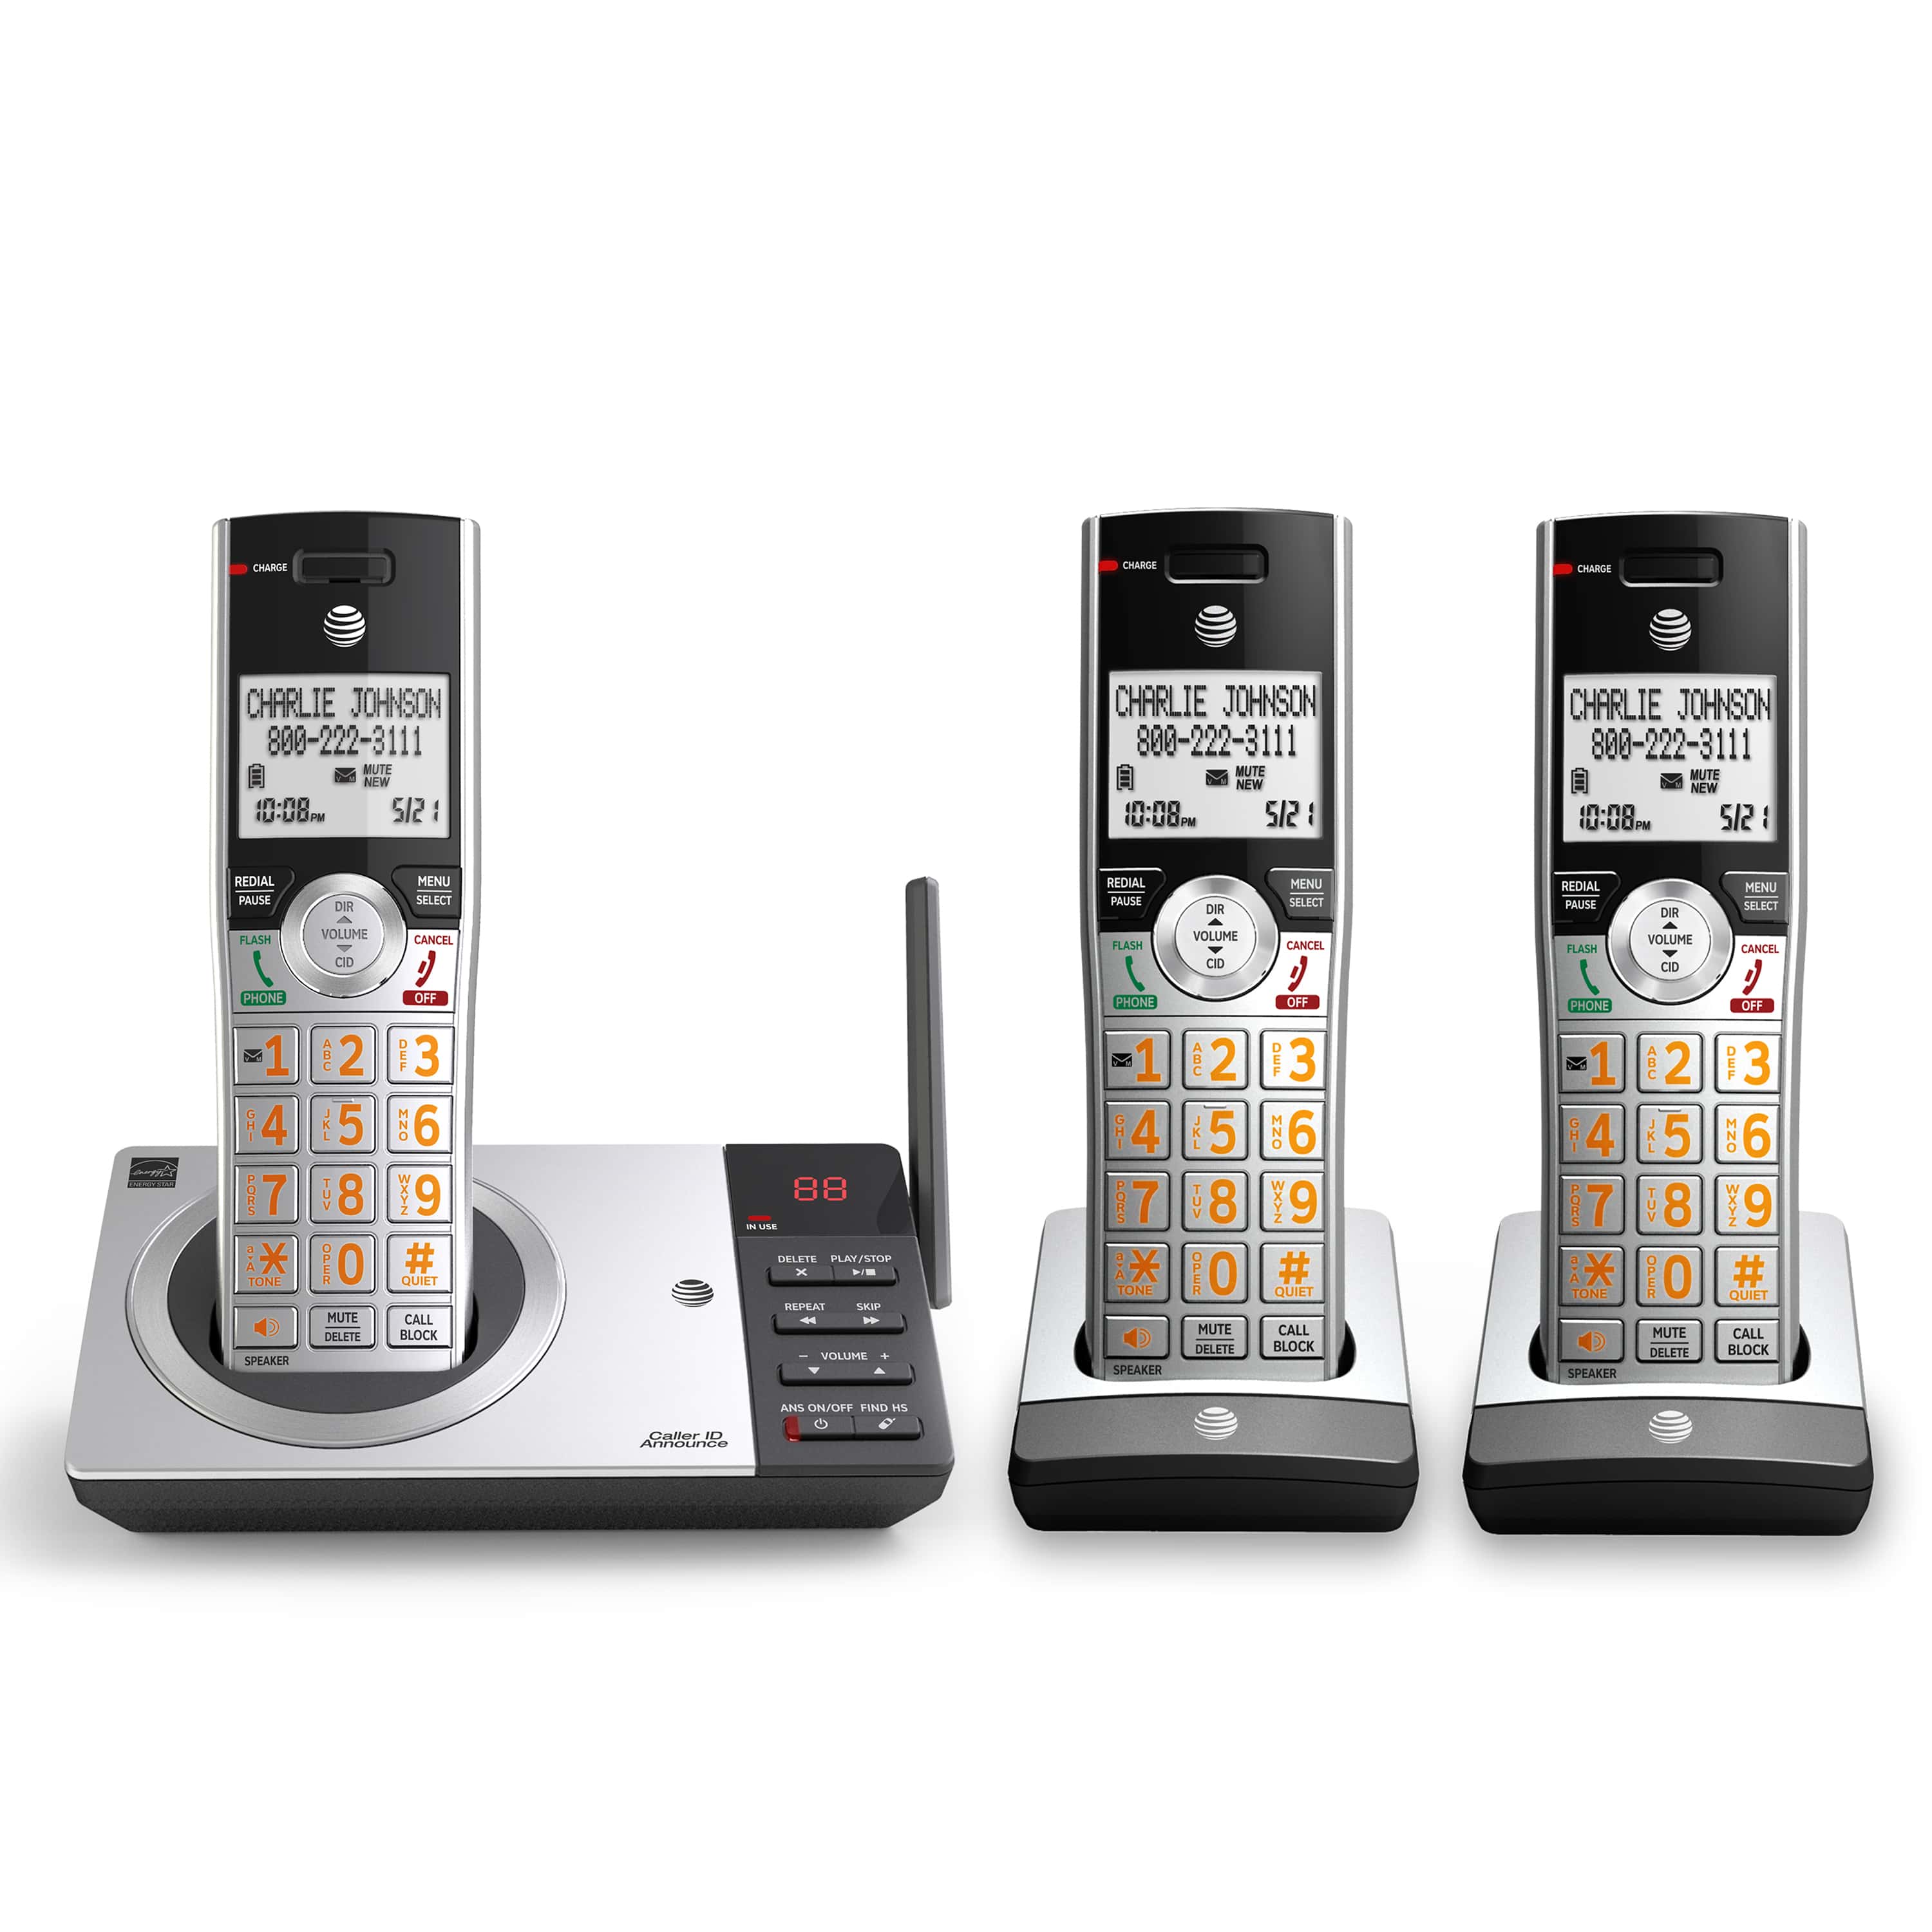 AT&T CL80107 Accessory Cordless Handset Requires AT&T CL82207 or Other Models to Operate Silver/Black 